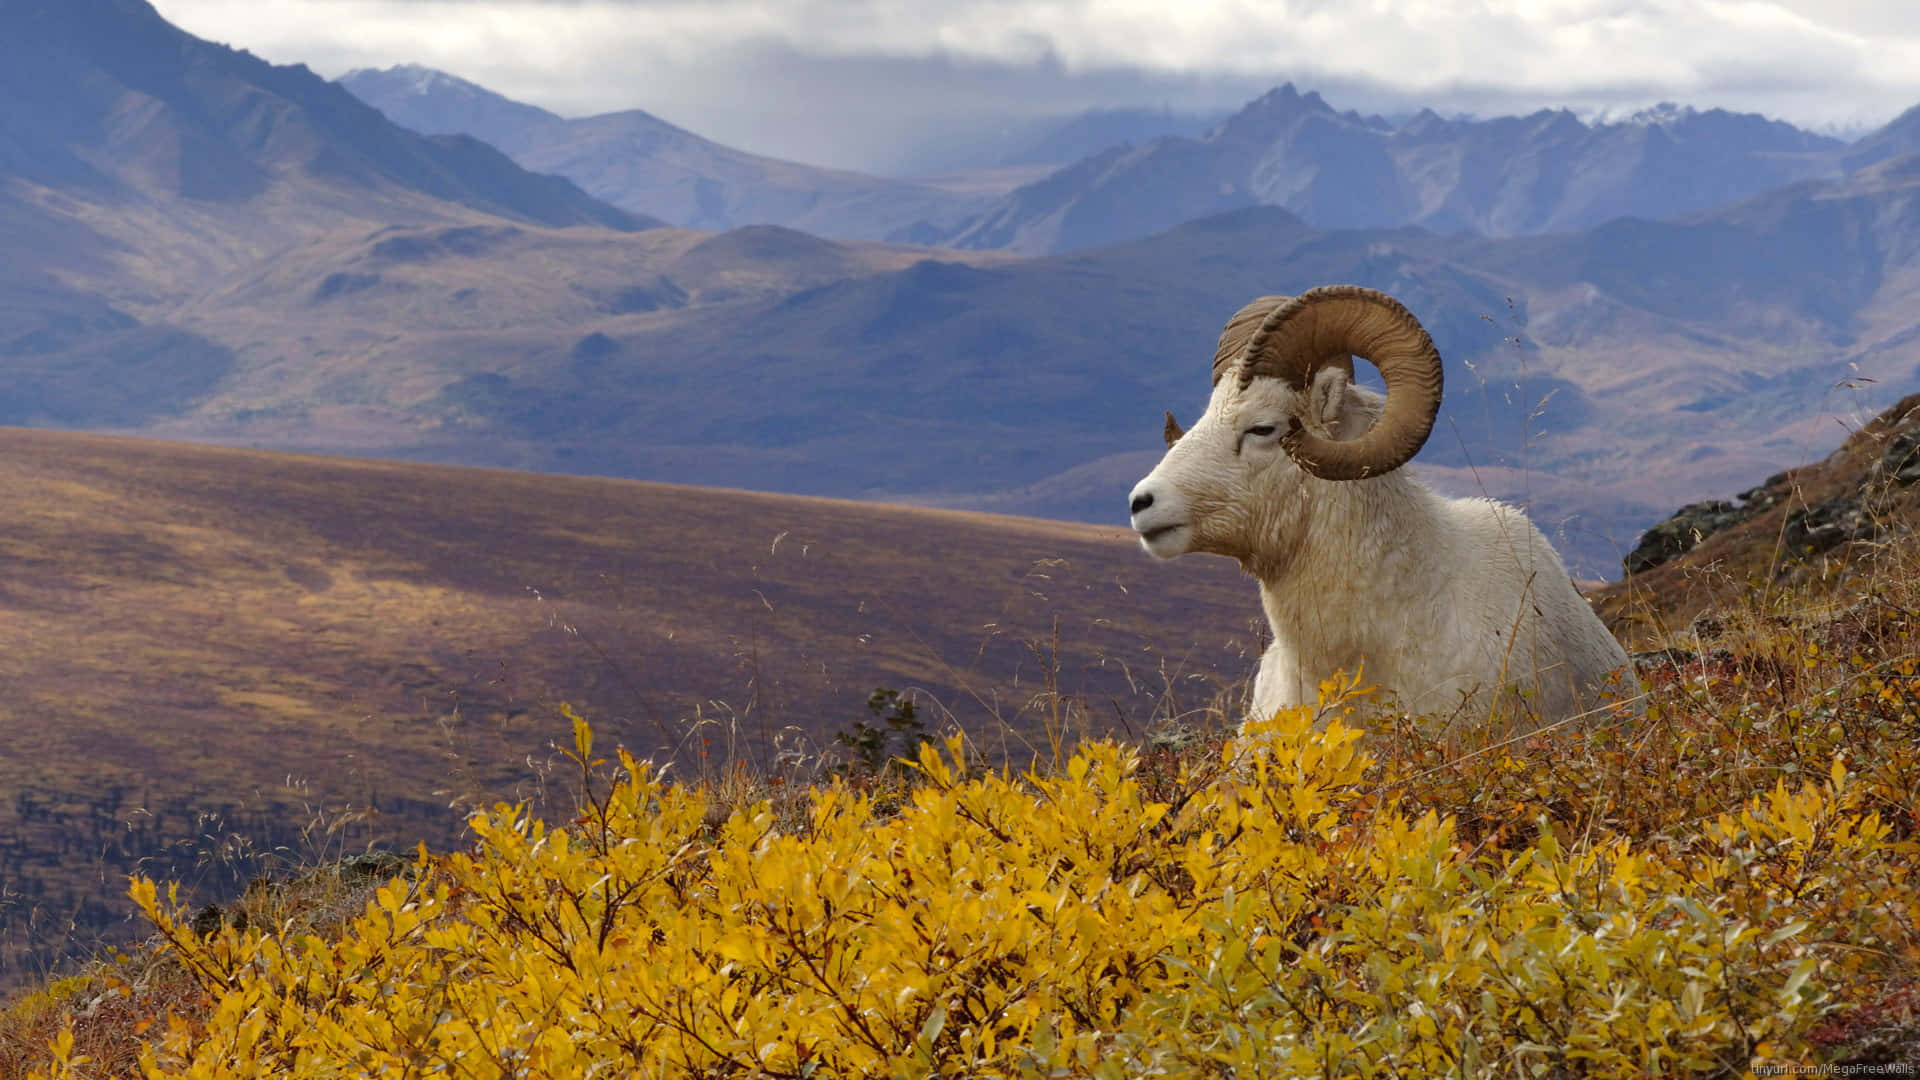 A curious goat stands atop a small rock, taking in its surroundings.